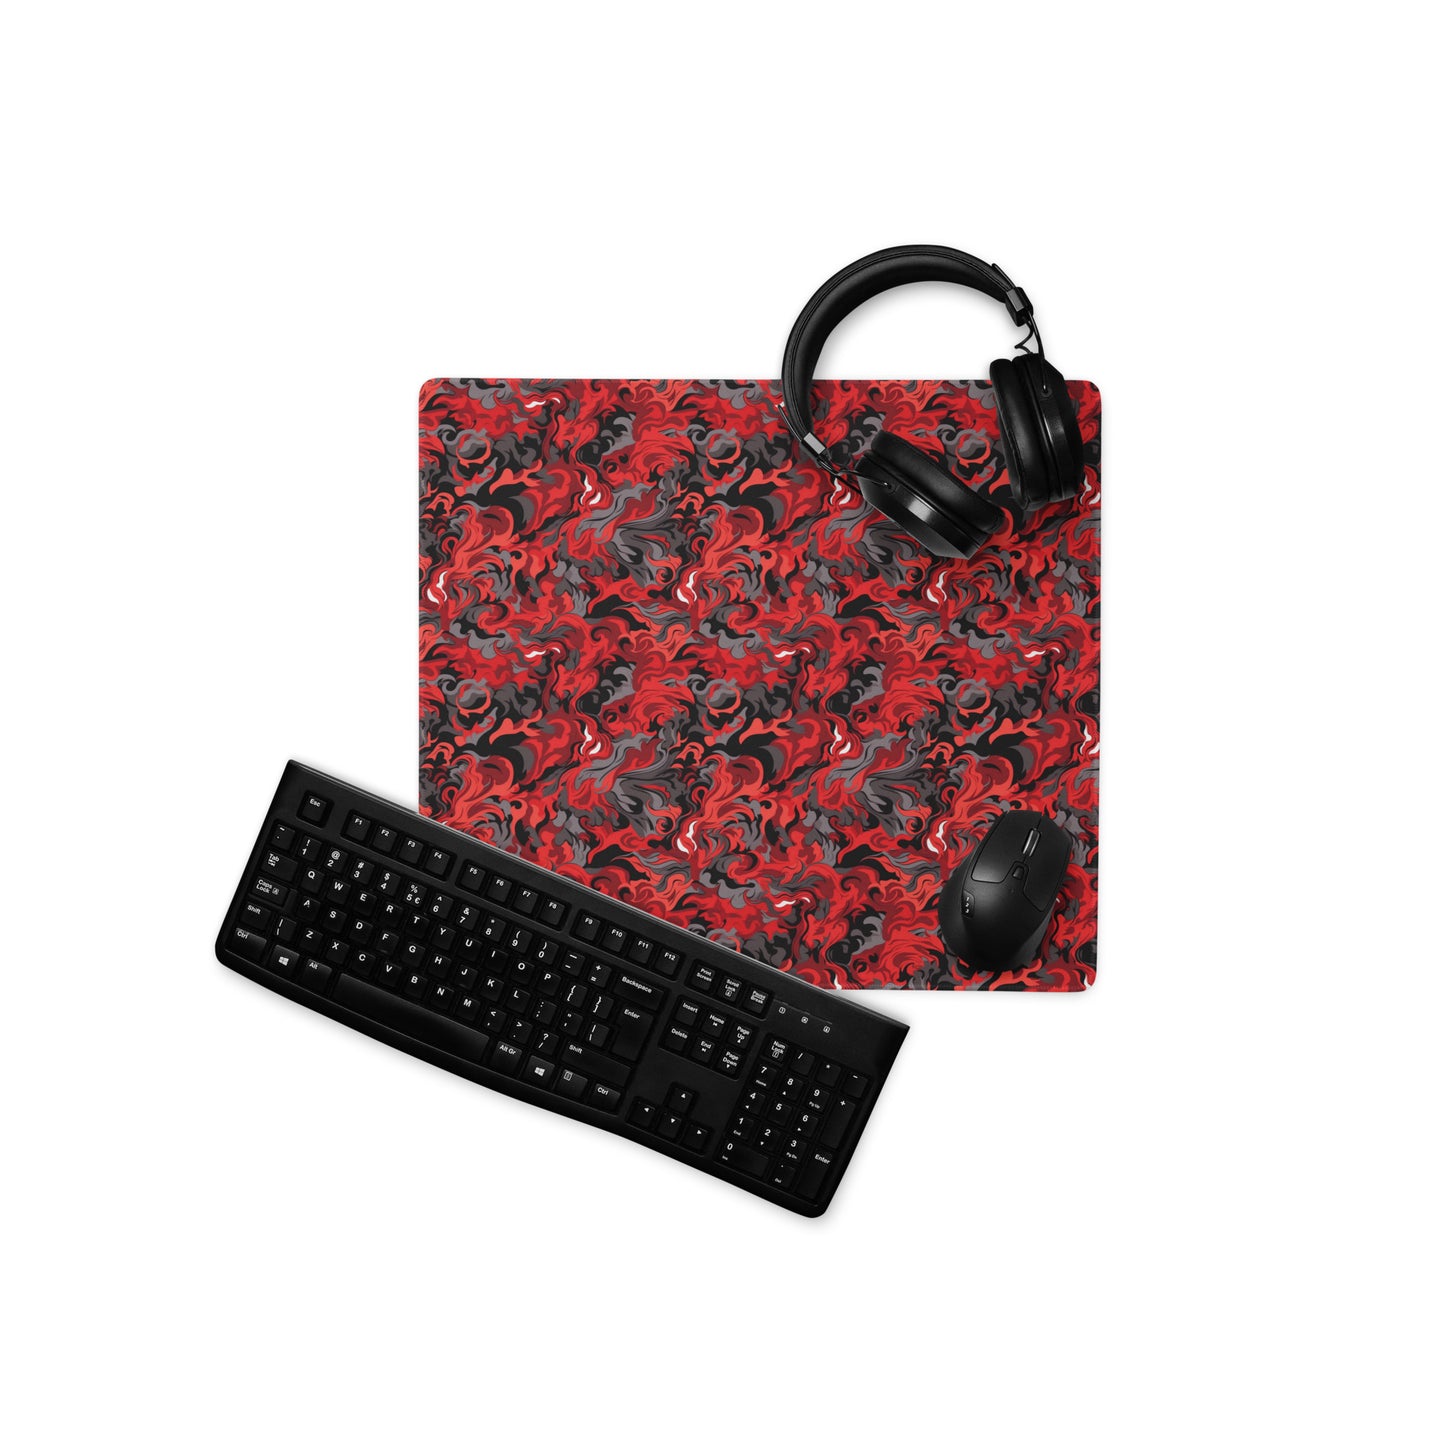 A 18" x 16" desk pad with a black and red camo pattern. With a keyboard, mouse, and headphones sitting on it.